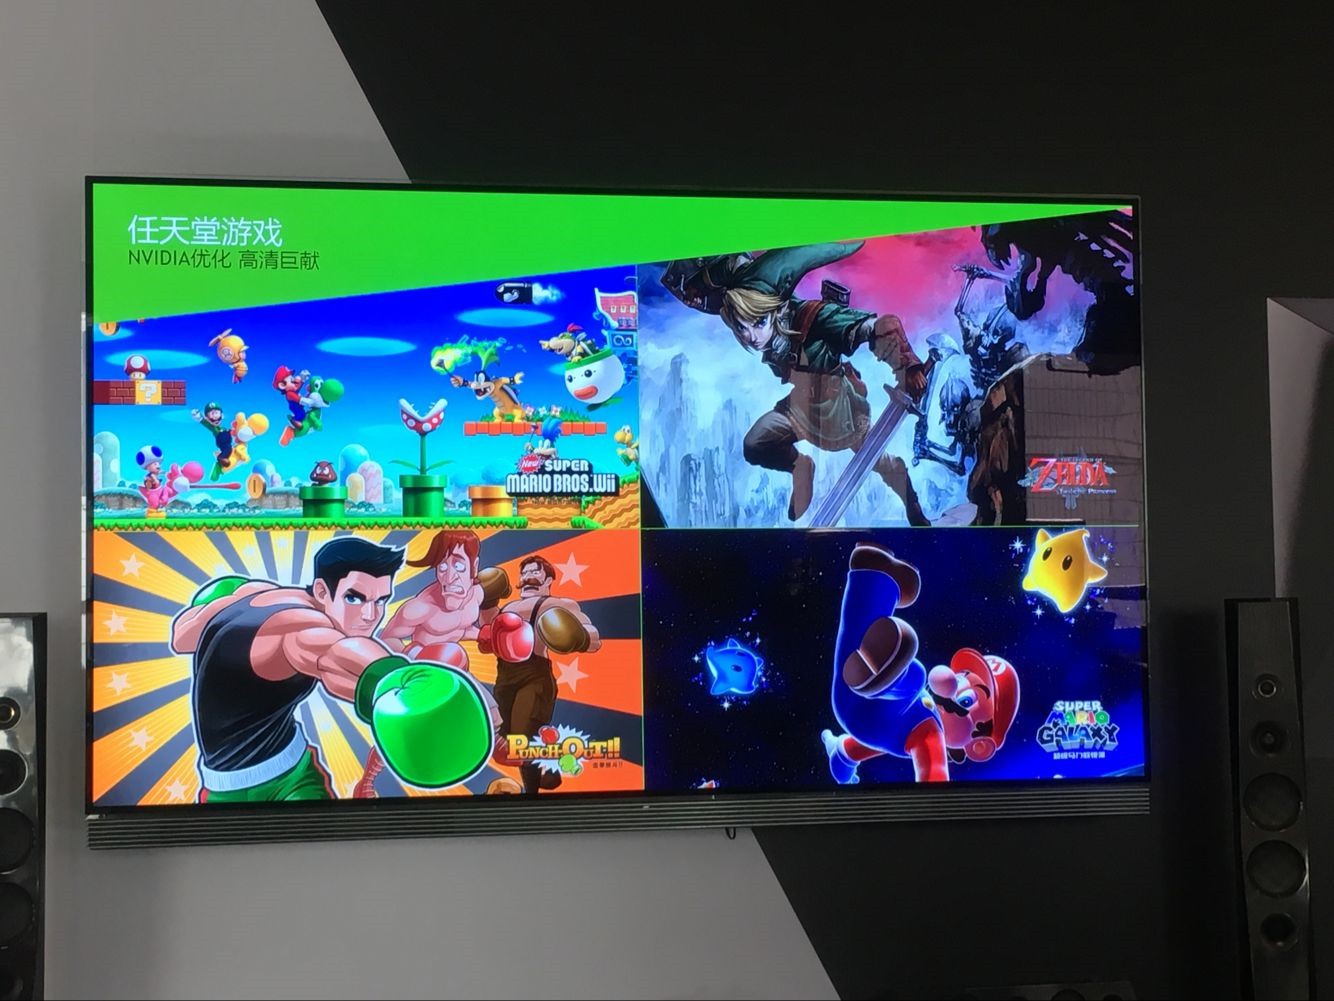 wii games on nvidia shield